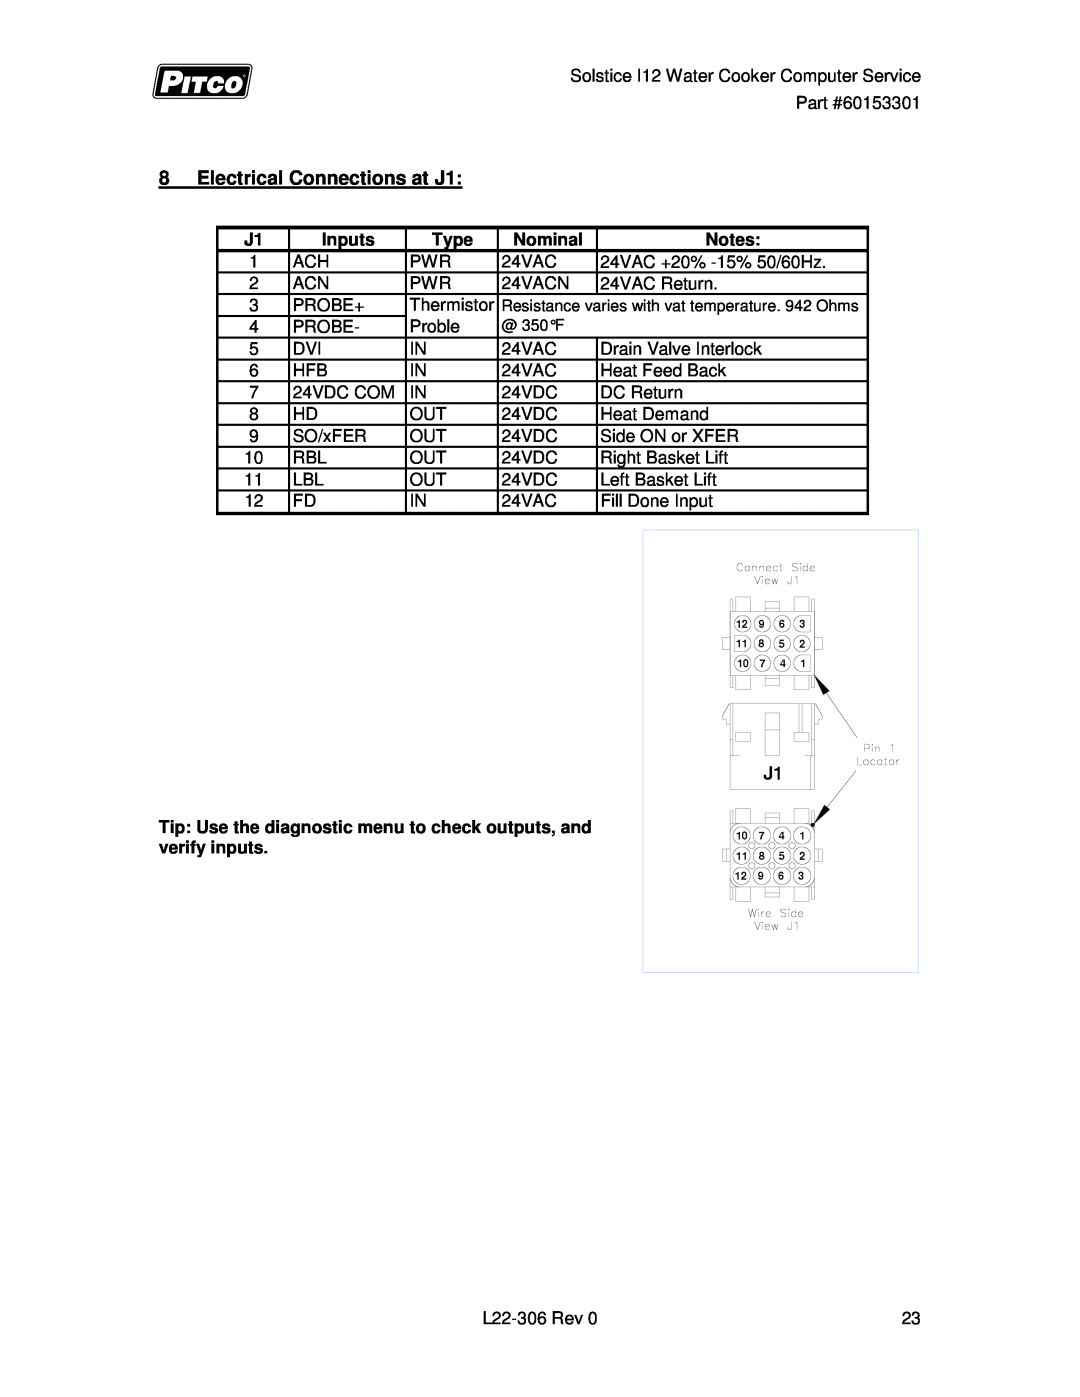 Pitco Frialator L22-306 service manual 8Electrical Connections at J1, Inputs, Type, Nominal 